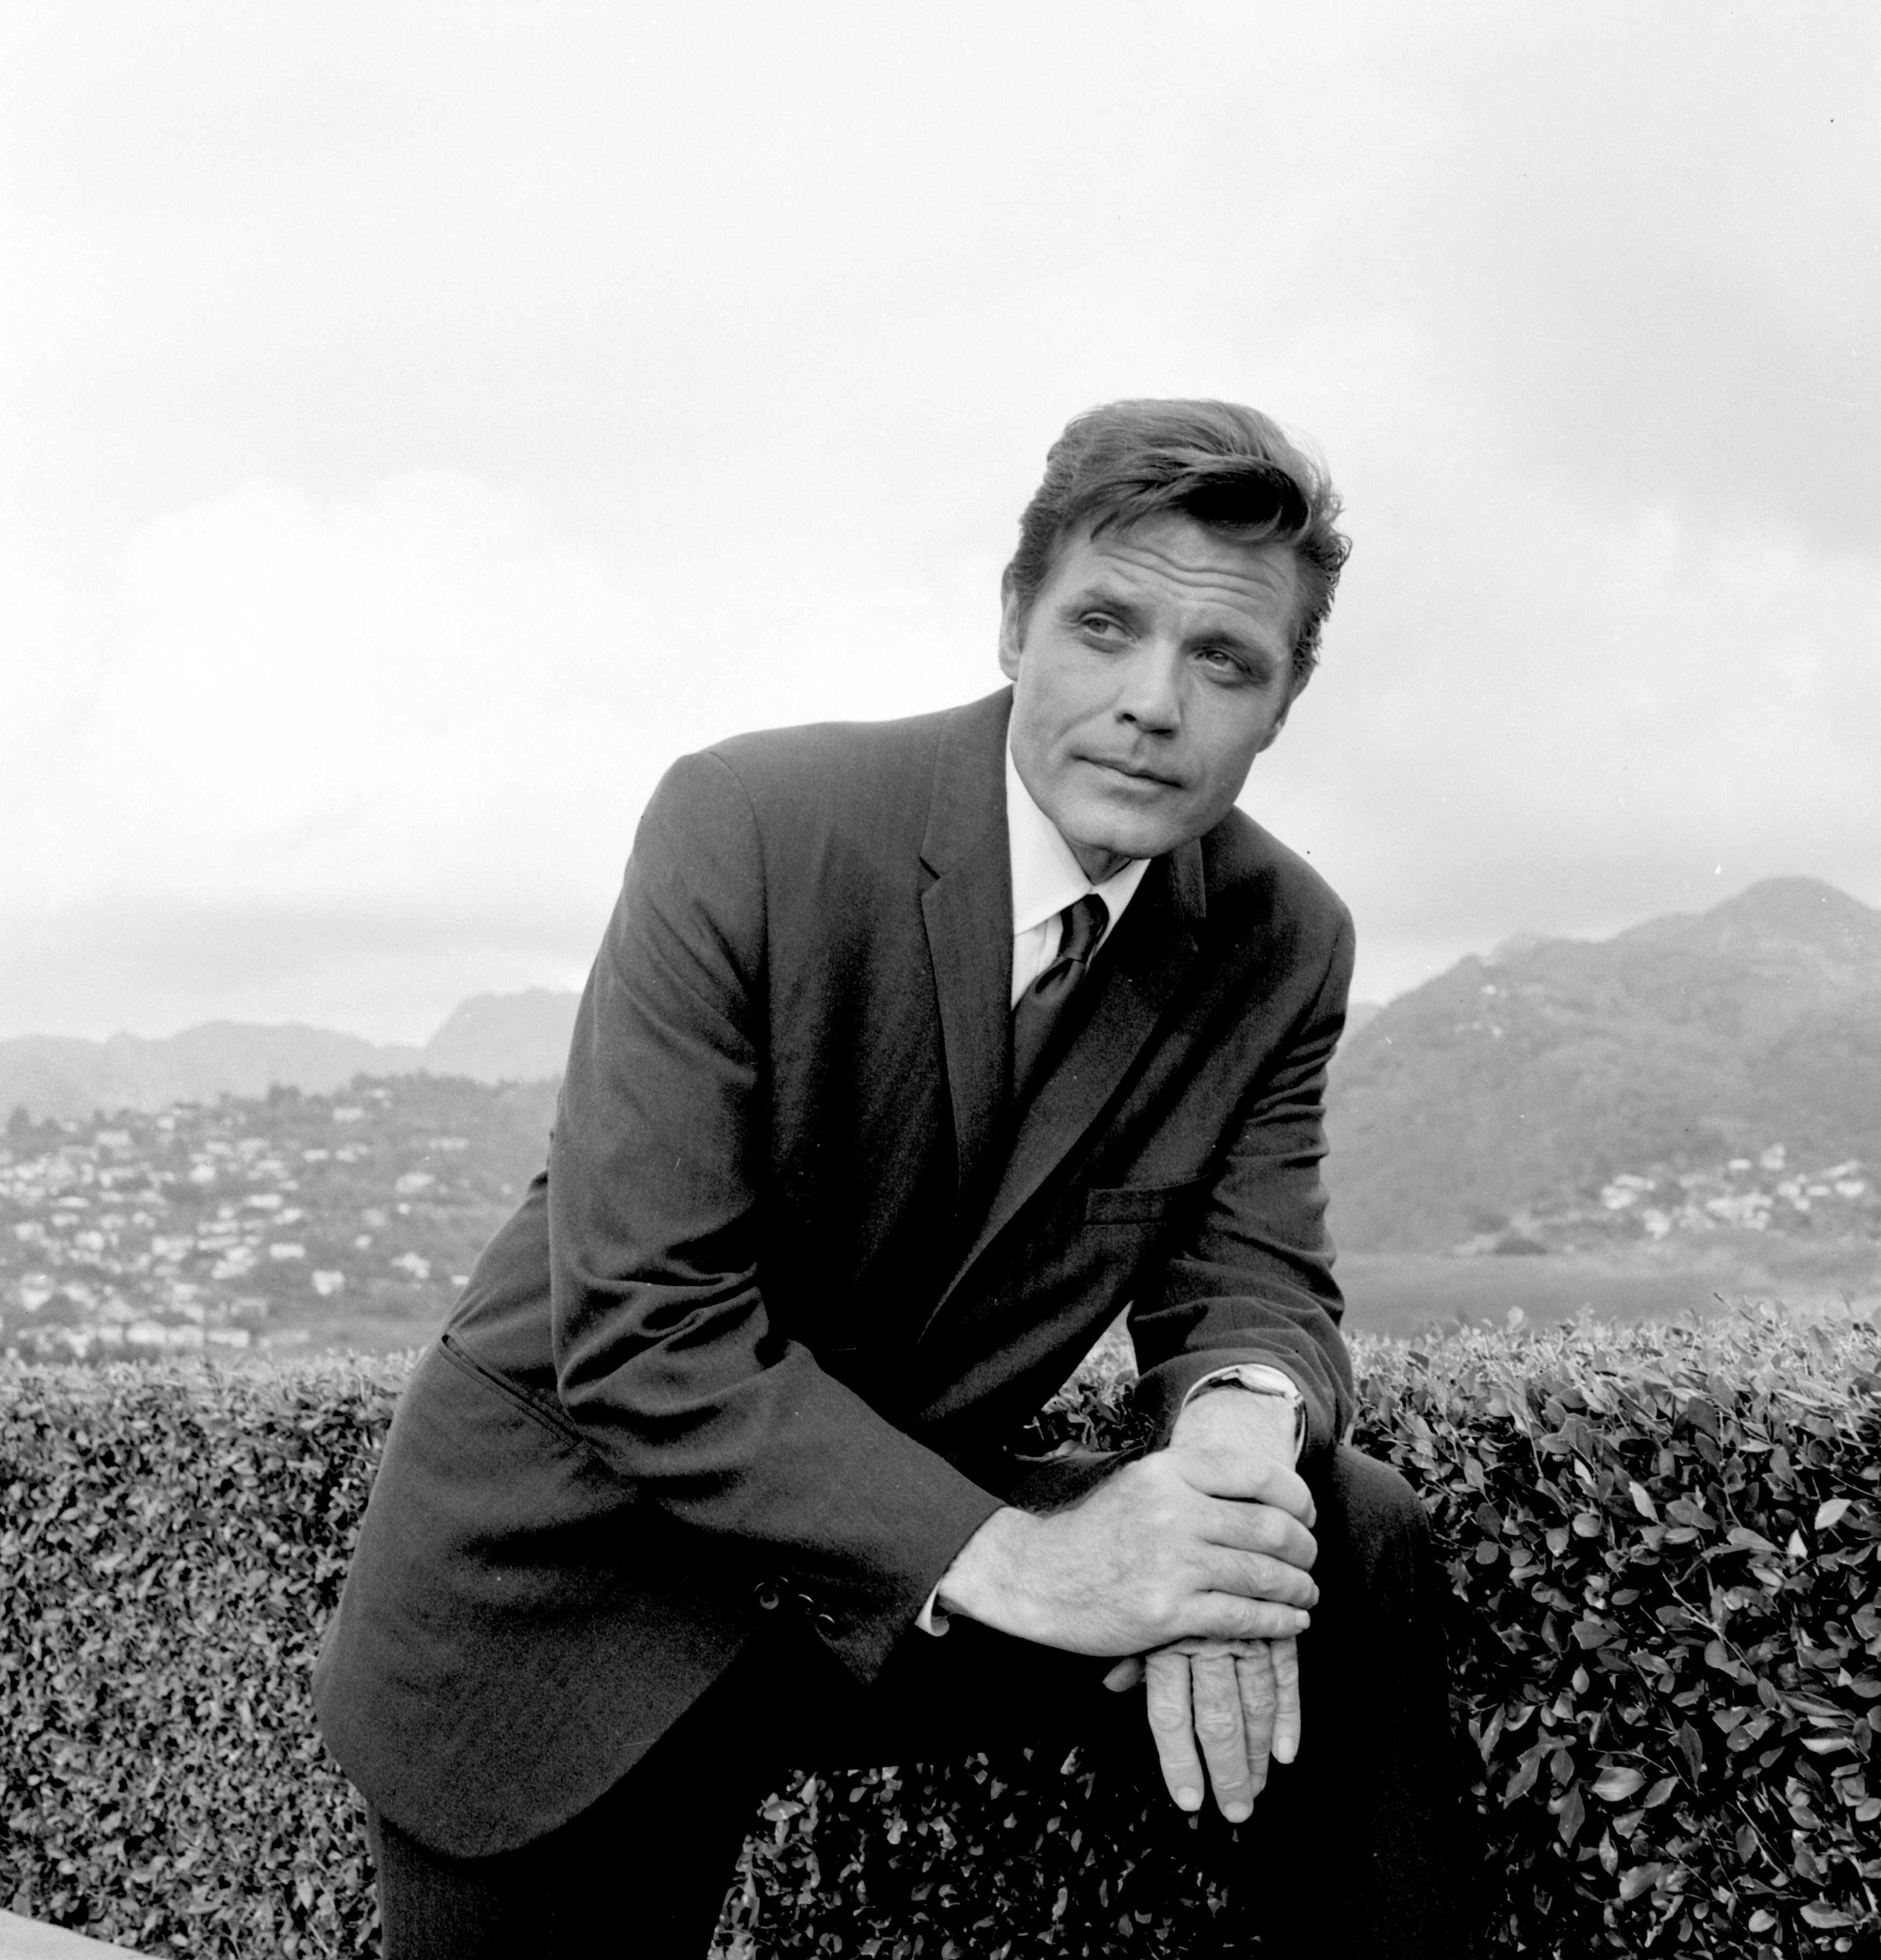 Promotional portrait of American actor Jack Lord (born John Joseph Patrick Ryan), in costume as Steve McGarrett from the television police crime drama 'Hawaii Five-O,' November 17, 1968. | Source: Getty Images